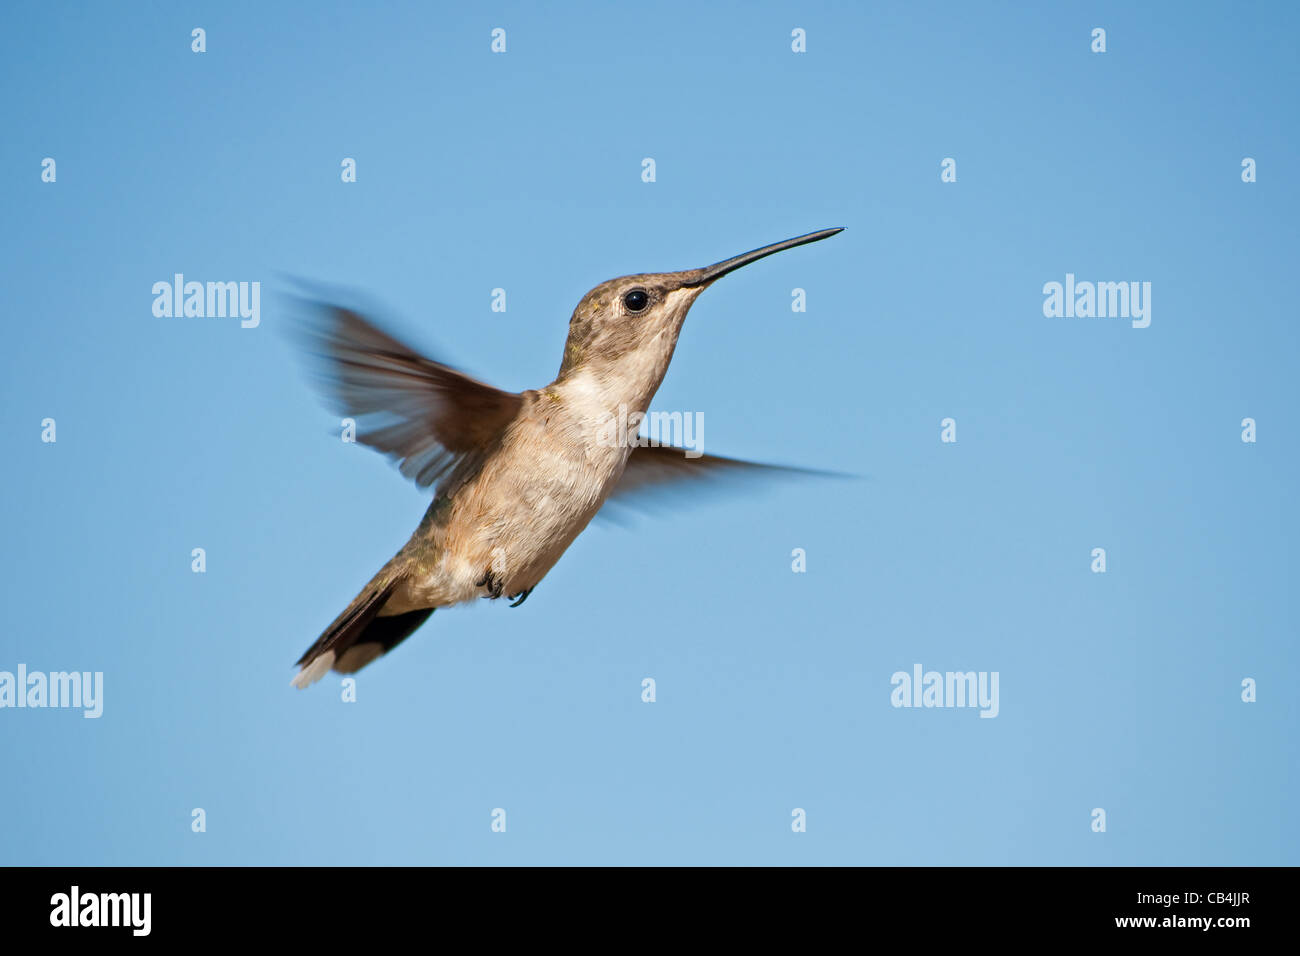 Female Ruby-throated Hummingbird hovering against blue sky Stock Photo